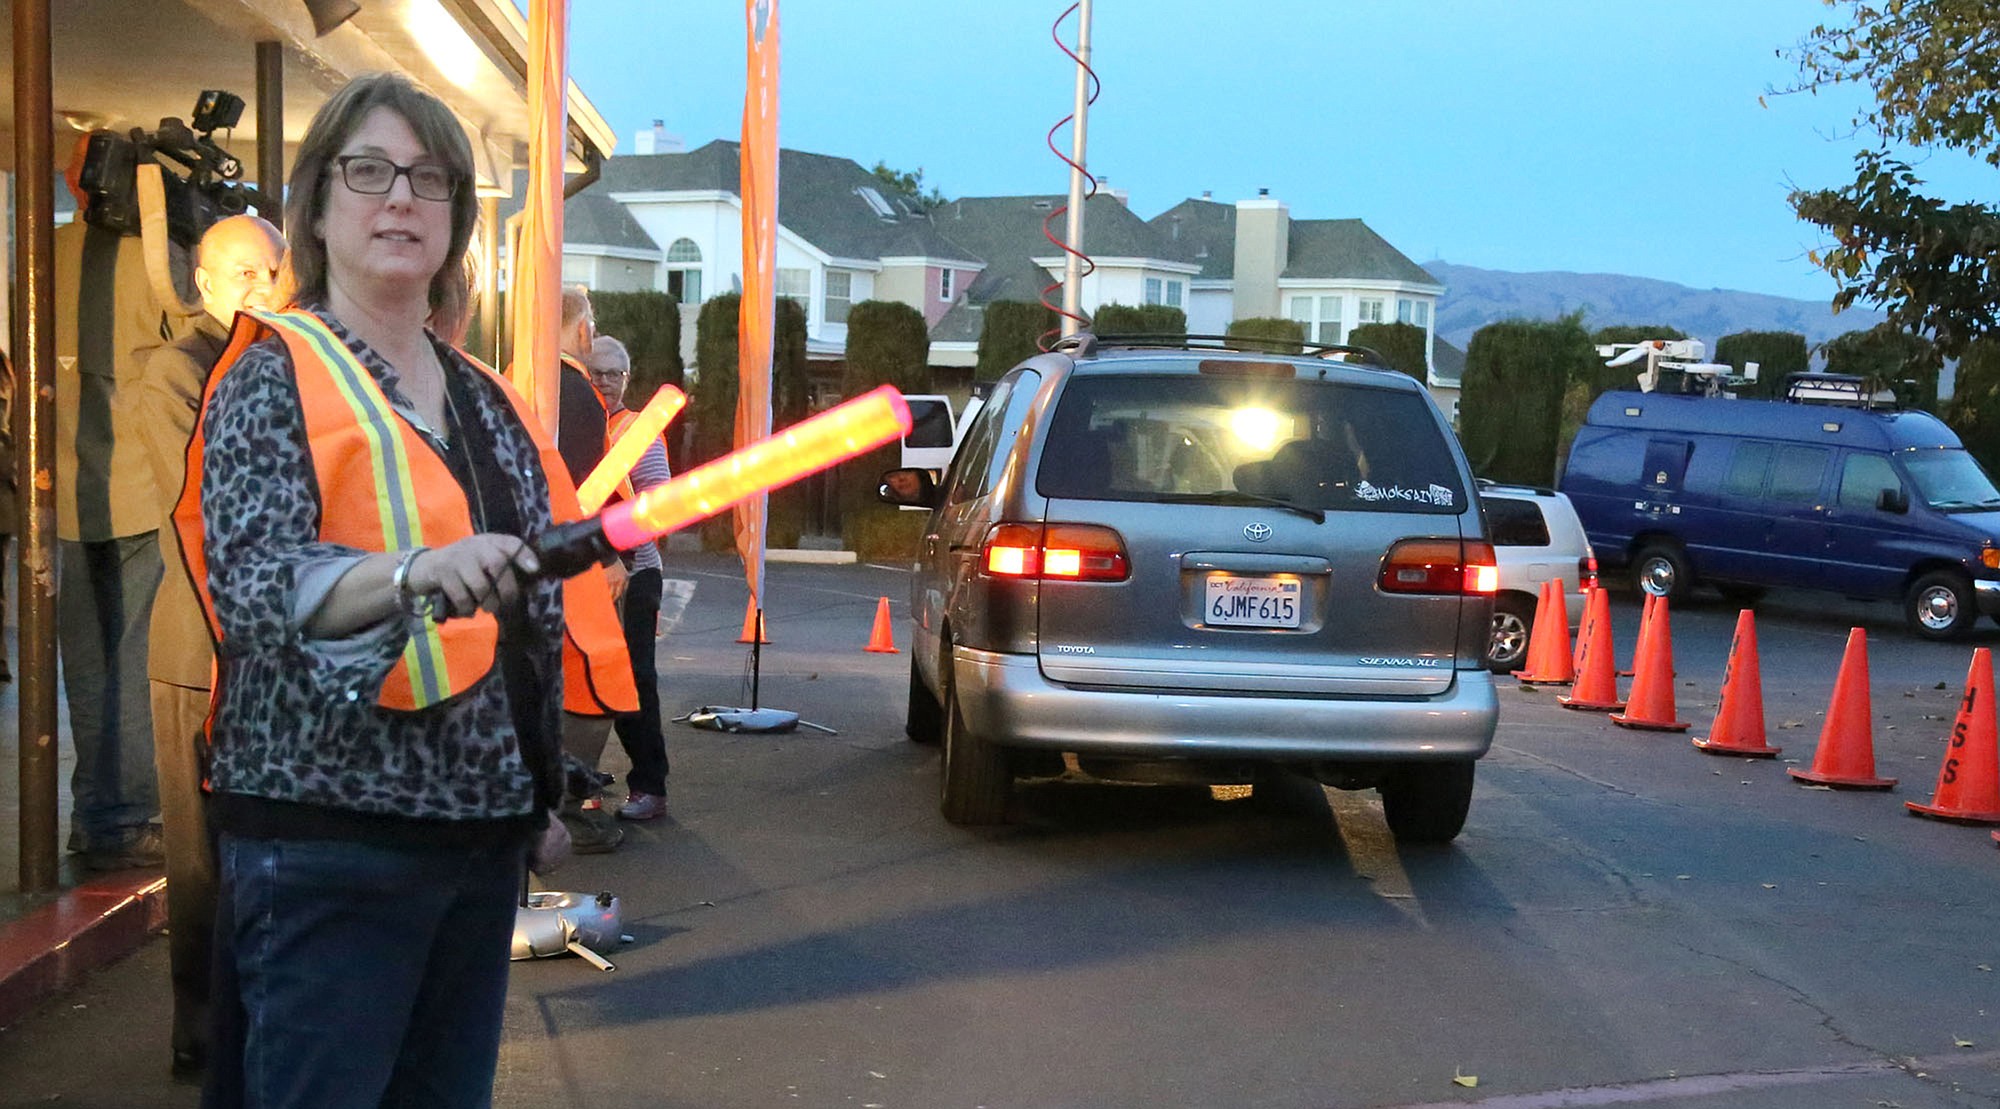 Amy Wilhelm directs traffic at the start of the drive-thru prayer service earlier this month at Holy Spirit Church in Fremont, Calif. The service is offered from 5 to 7 p.m.